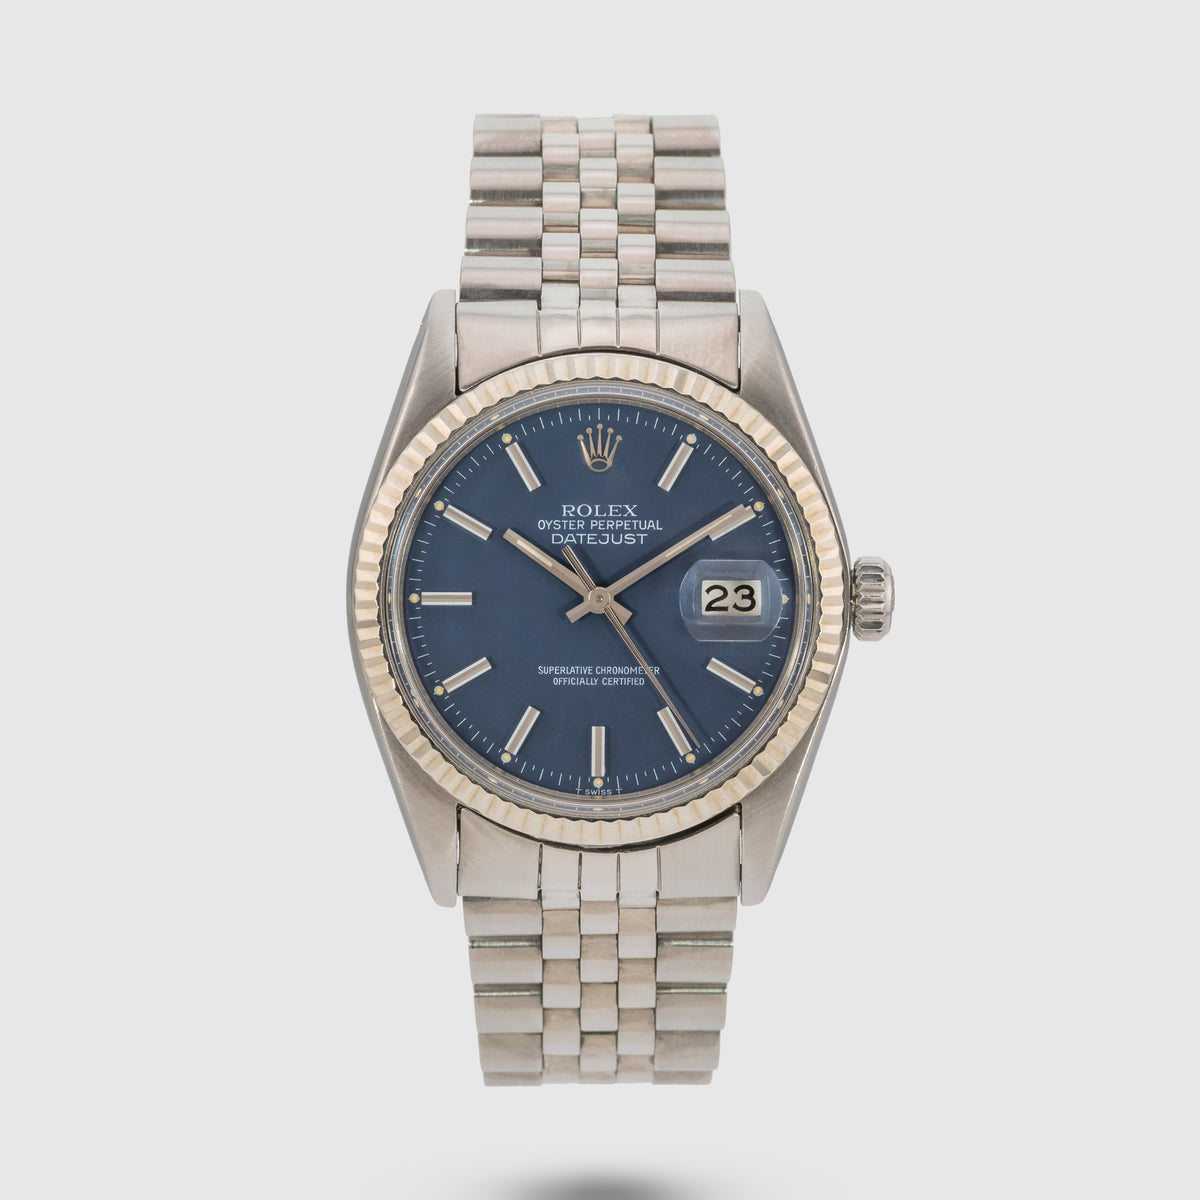 1979 Rolex Datejust Blue Dial Ref. 16014 (with Papers)